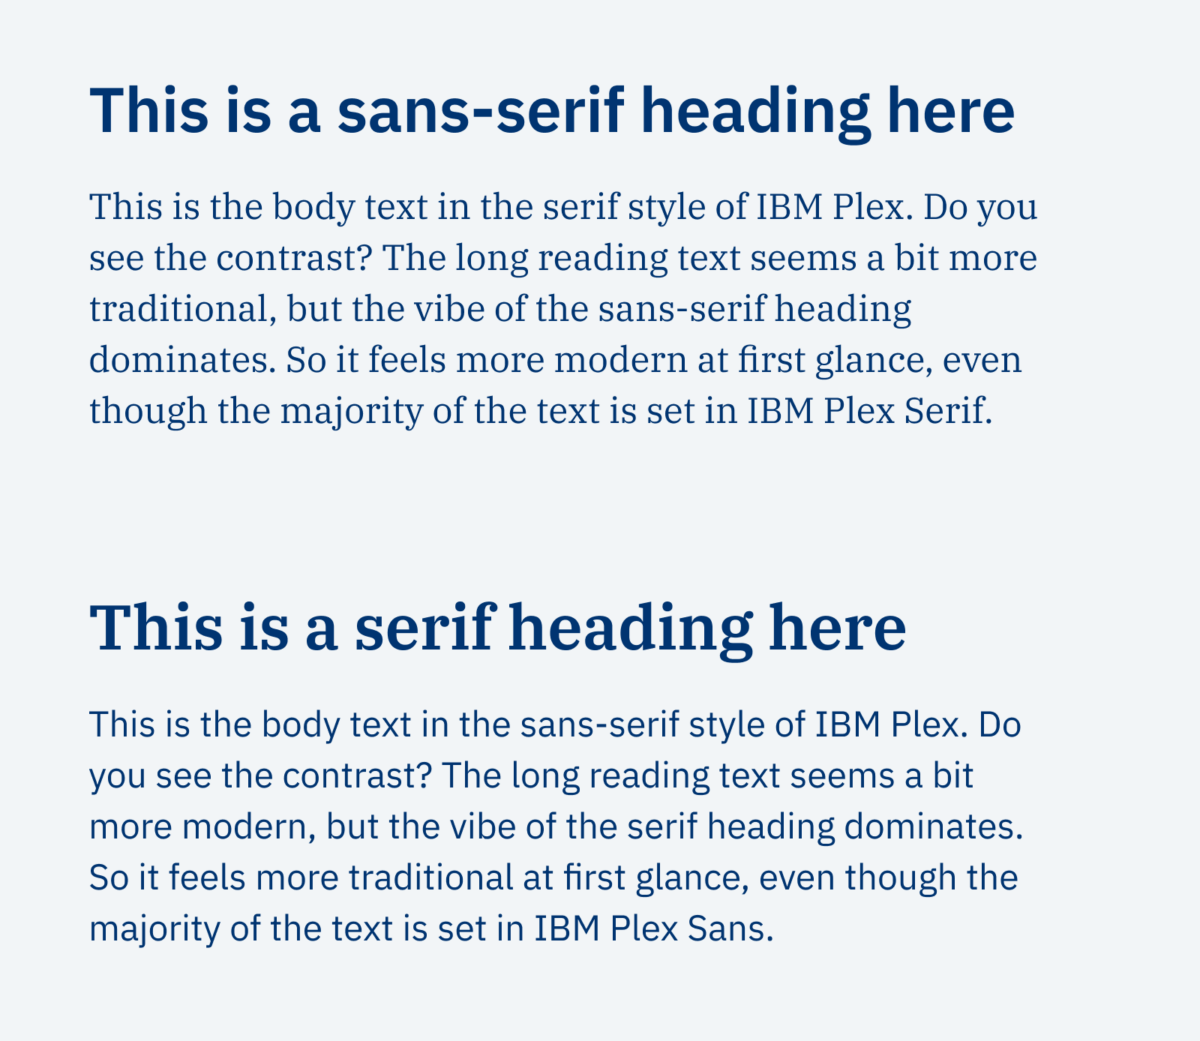 An example set in IBM Plex: This is a sans-serif heading here This is the body text in the serif style of IBM Plex. Do you see the contrast? The long reading text seems a bit more traditional, but the vibe of the sans-serif heading dominates. So it feels more modern at first glance, even though the majority of the text is set in IBM Plex Serif. This is a serif heading here This is the body text in the sans-serif style of IBM Plex. Do you see the contrast? The long reading text seems a bit more modern, but the vibe of the serif heading dominates. So it feels more traditional at first glance, even though the majority of the text is set in IBM Plex Sans.